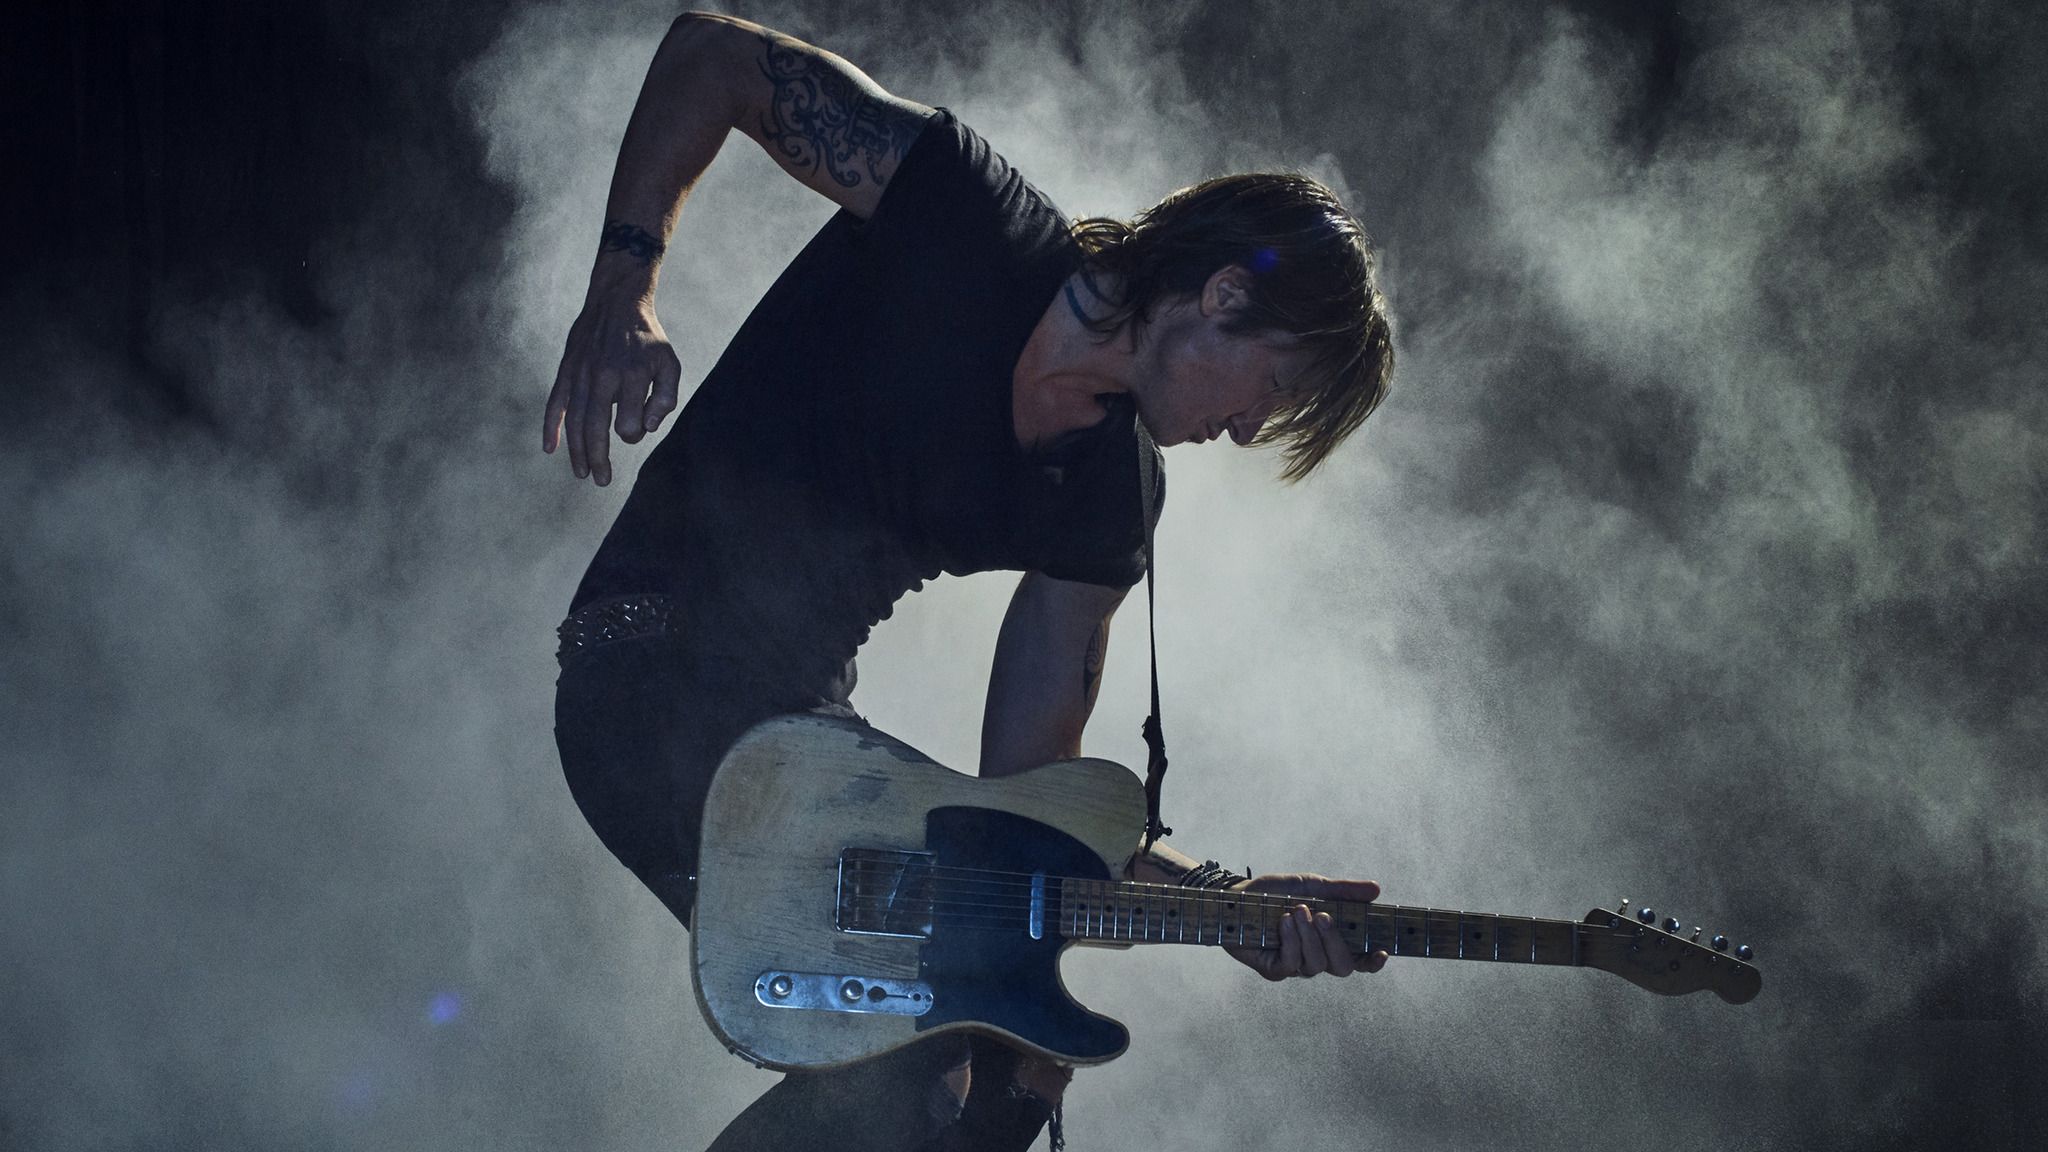 Keith Urban Wallpapers